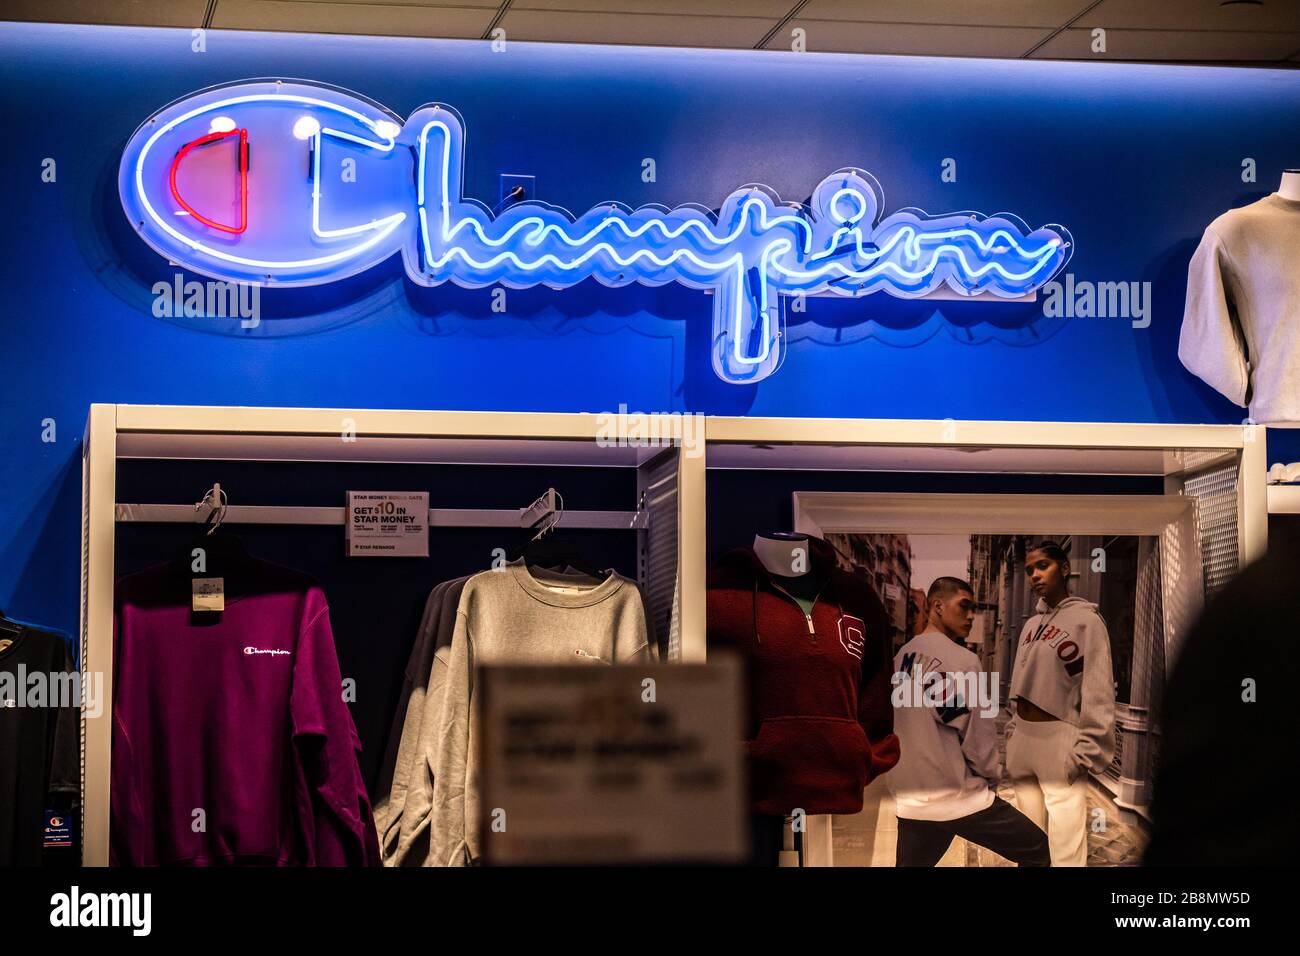 Champion Clothing Outlet New York Online, 53% OFF | www.ingeniovirtual.com